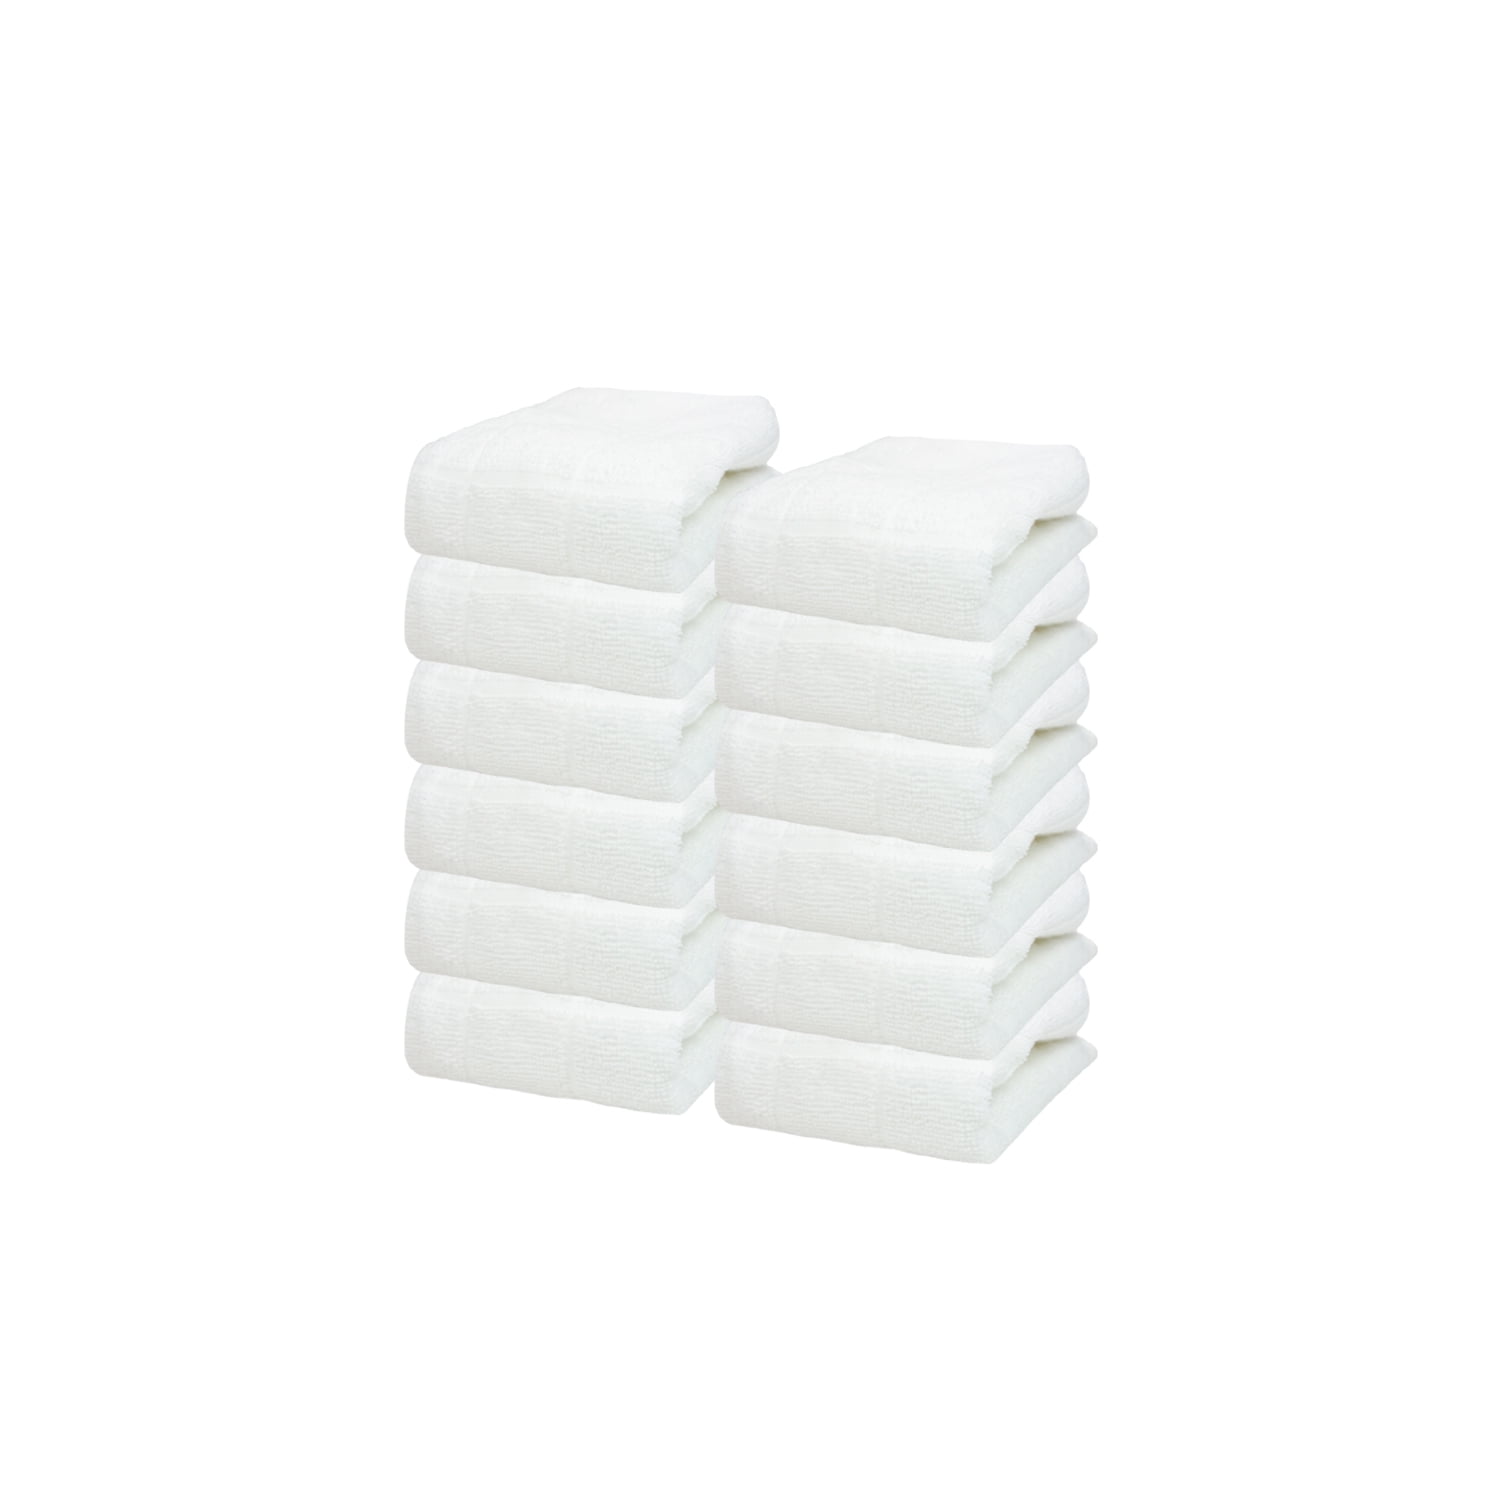 Buy Wholesale Kitchen Towels Solid Color / Wholesale Terry Cloth Printed Kitchen  Towel / Wholesale White Linen Kitchen Towels from Hebei Tianqi Import And  Export Trade Co., Ltd., China